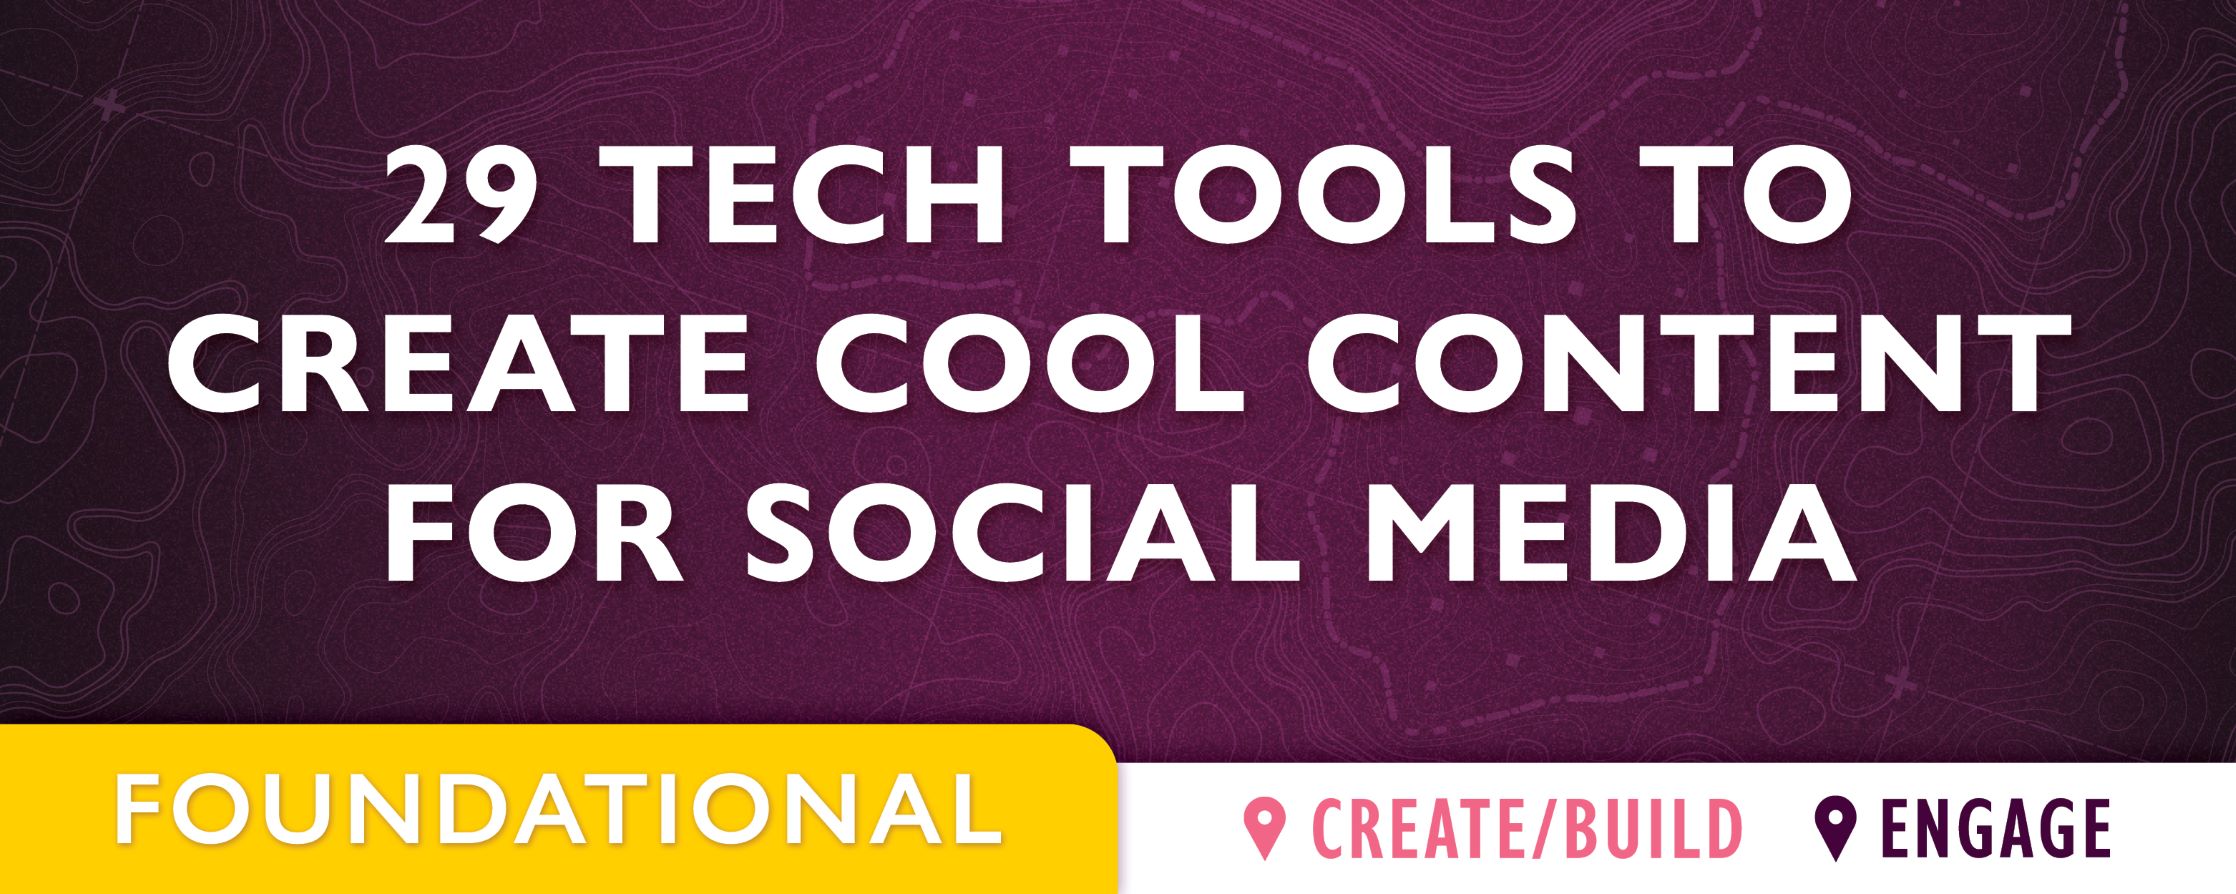 purple background with text: 29 Tech Tools to Create Cool Content for Social Media 